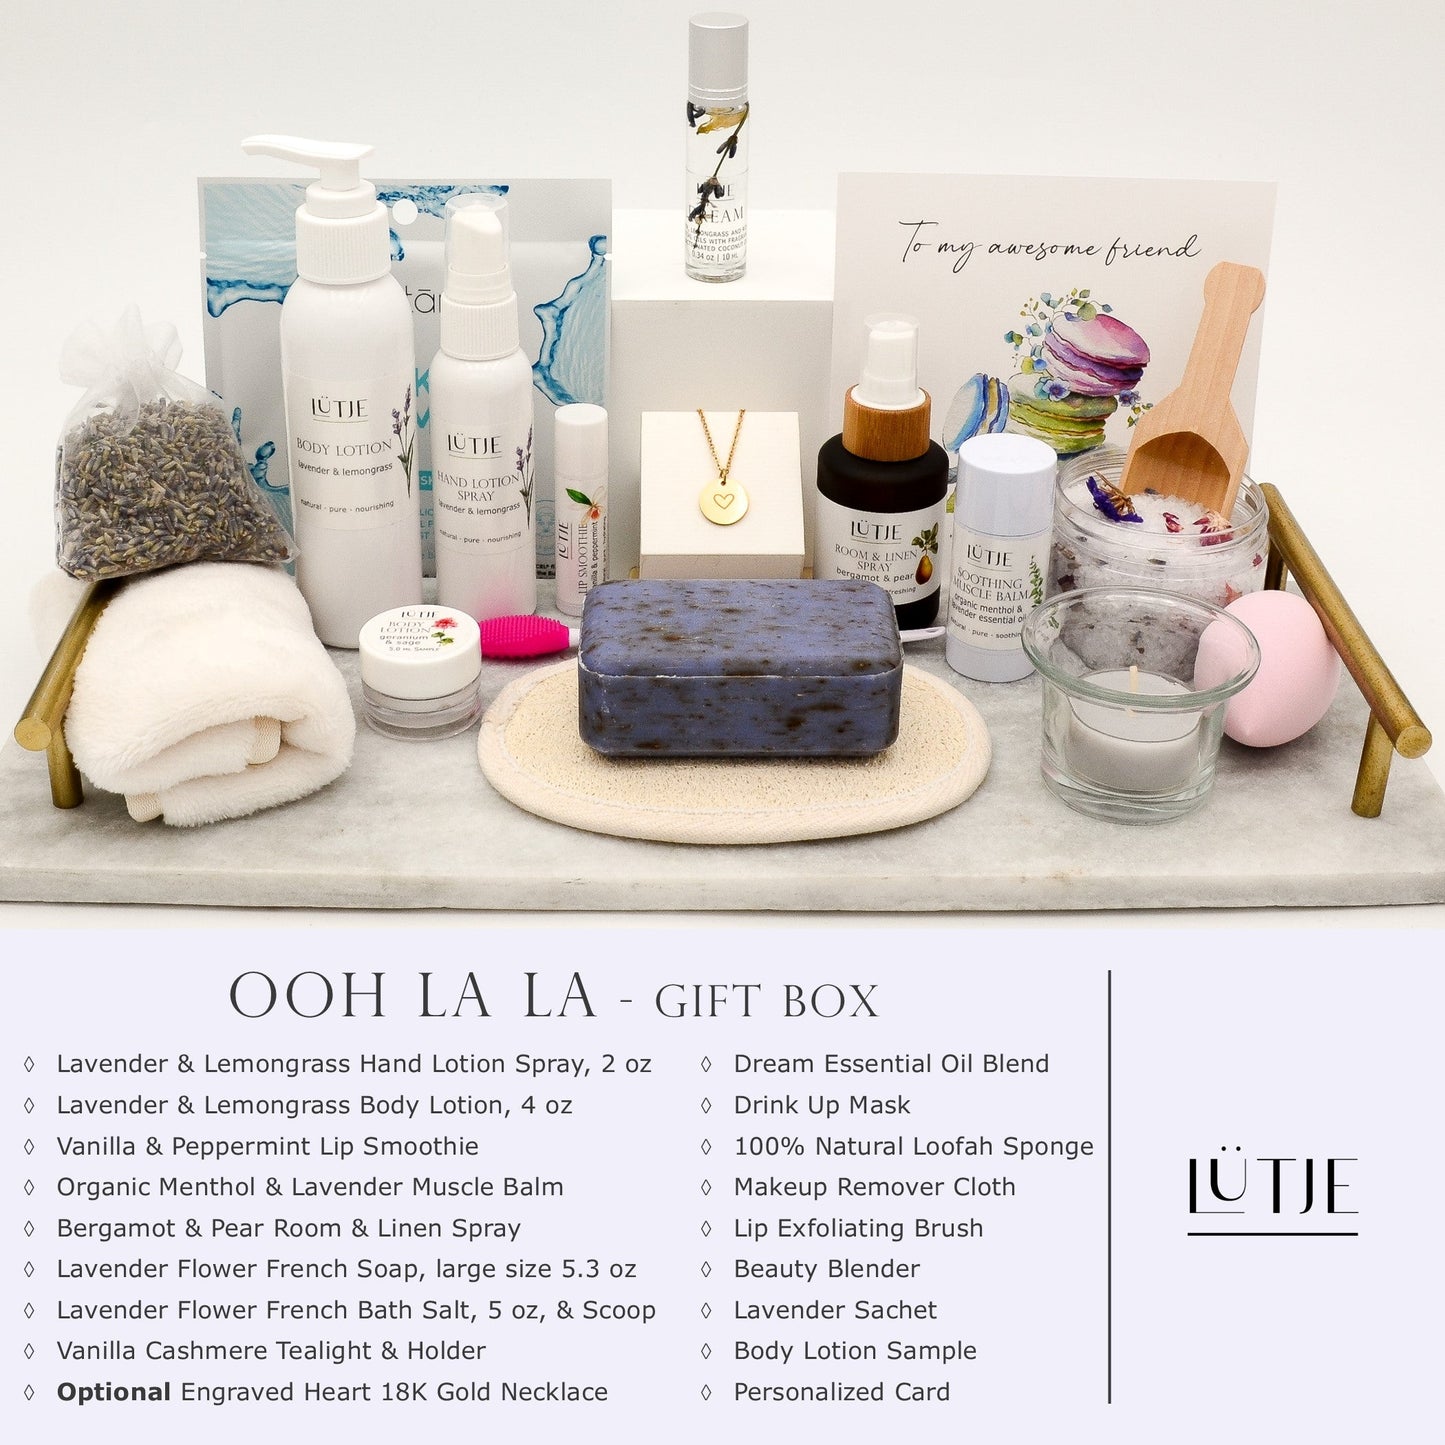 Ooh La La Gift Box for women, wife, daughter, BFF, sister, mom, or grandma, includes Lavender & Lemongrass hand lotion spray and body lotion, essential oil, lip balm, soothing muscle balm, Bergamot & Pear room & linen spray, French soap, French bath salts, hydrating face mask, other bath, spa and self-care items, and optional 18K gold-plated necklace with engraved heart.